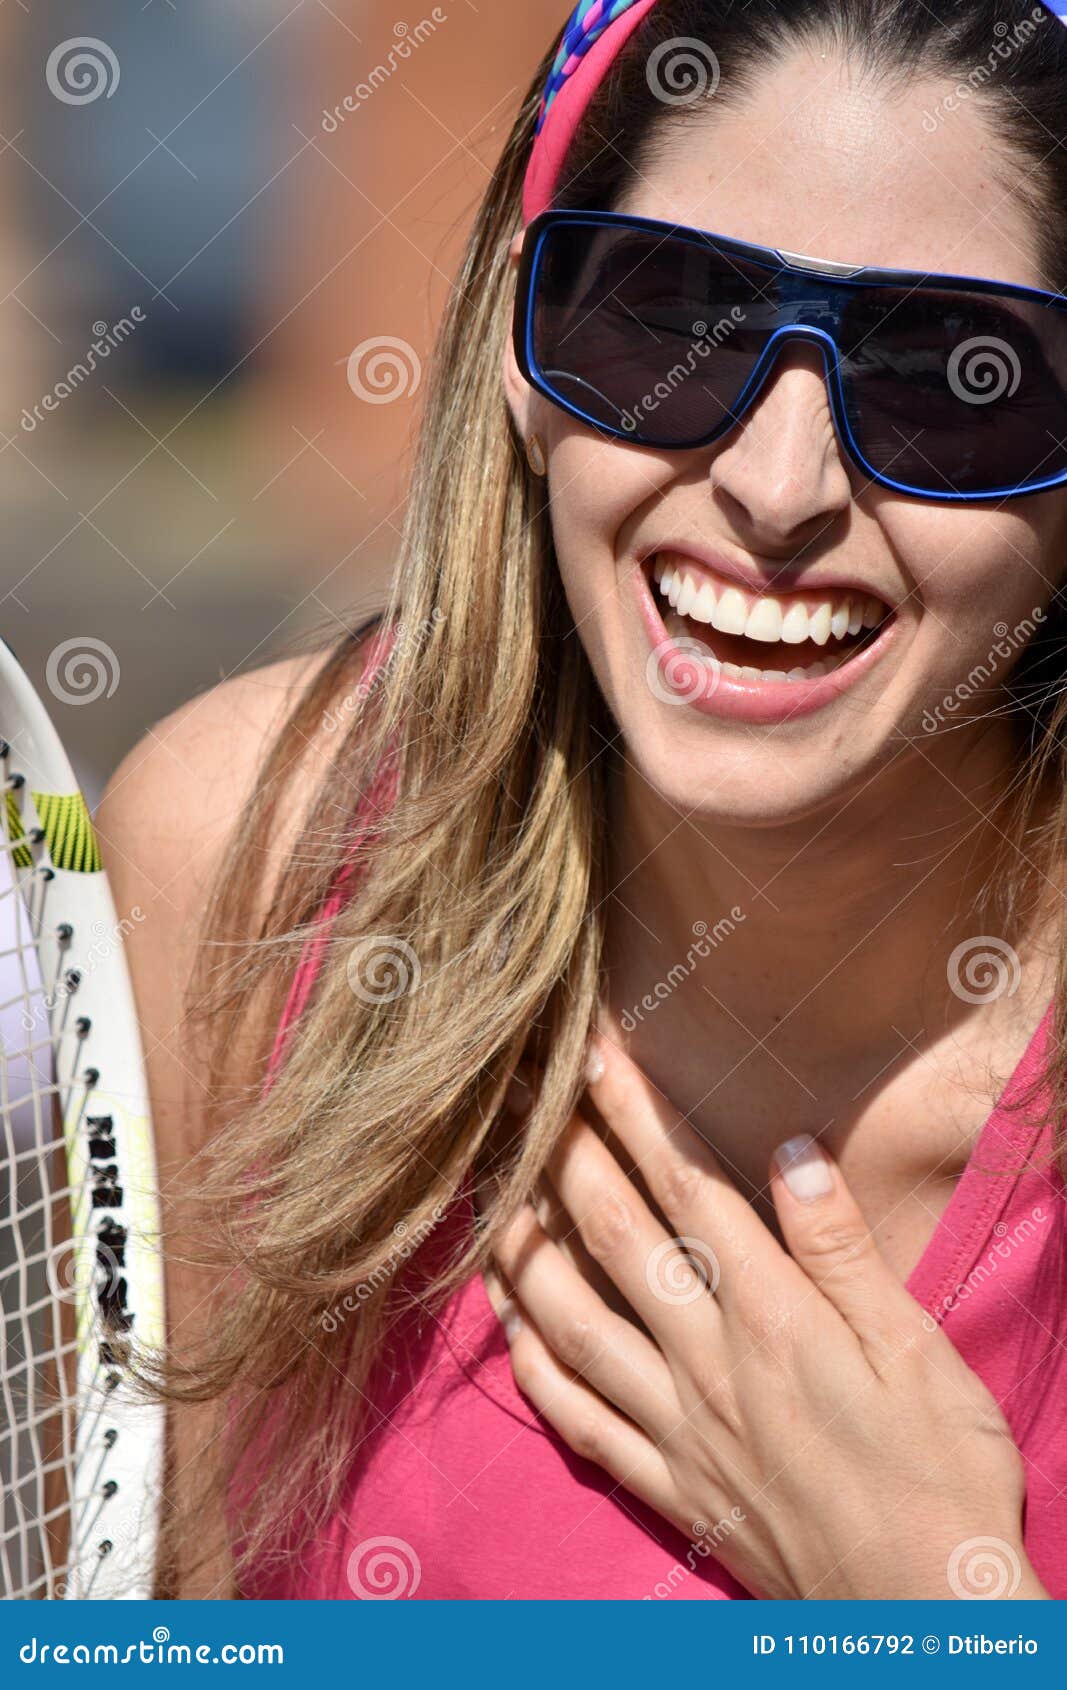 Colombian Girl Tennis Player Laughing Wearing Sunglasses Stock